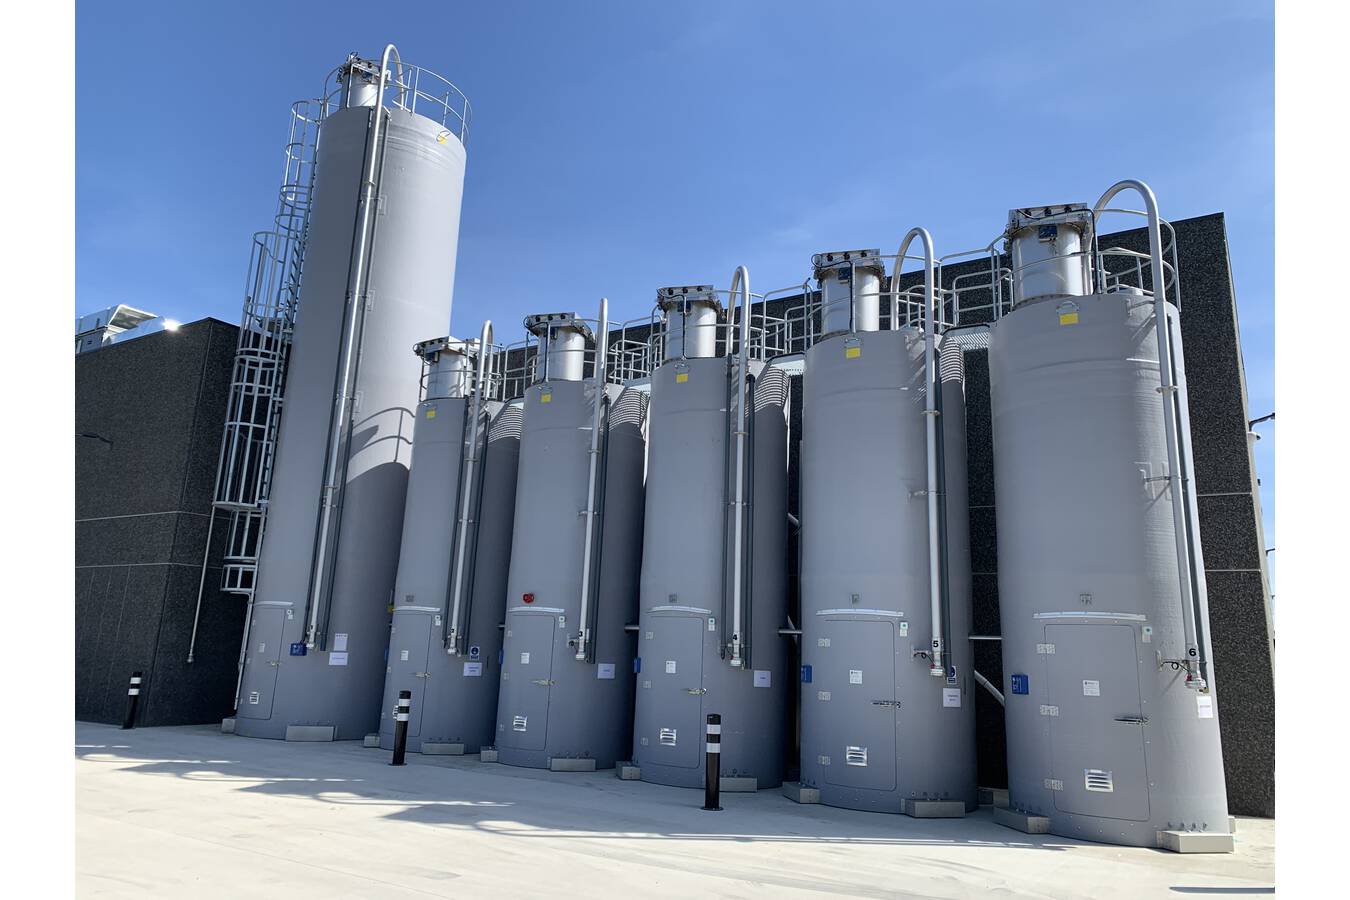 Six composite flour storage silos at a new bakery Polem and Siloba installed composite storage silos in Bree, Belgium